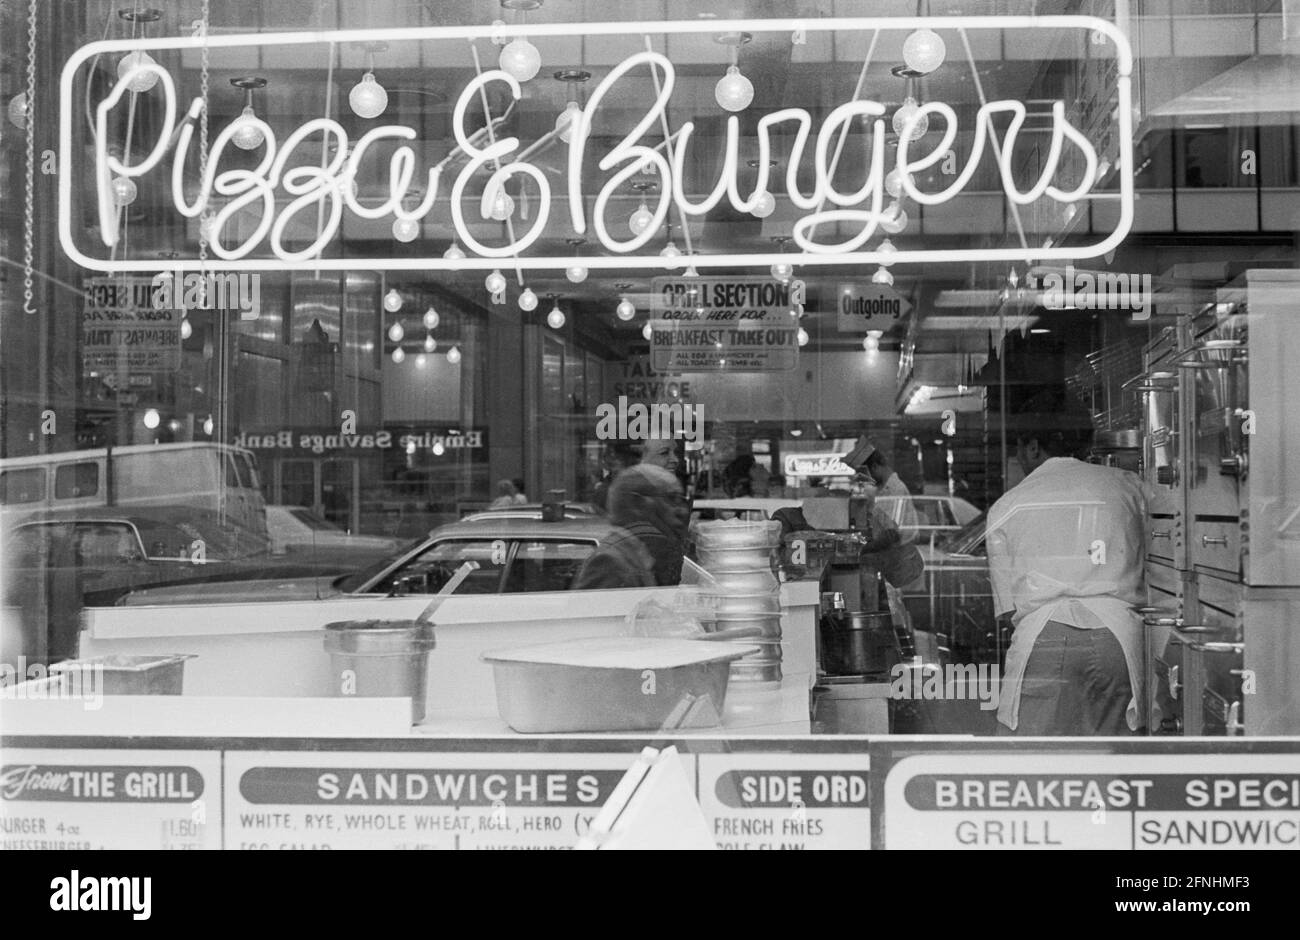 New York City Photo Essay, April 30, 1981- Pizza & Burgers. Reflection of Empire Savings Bank sign in the the window. Stock Photo